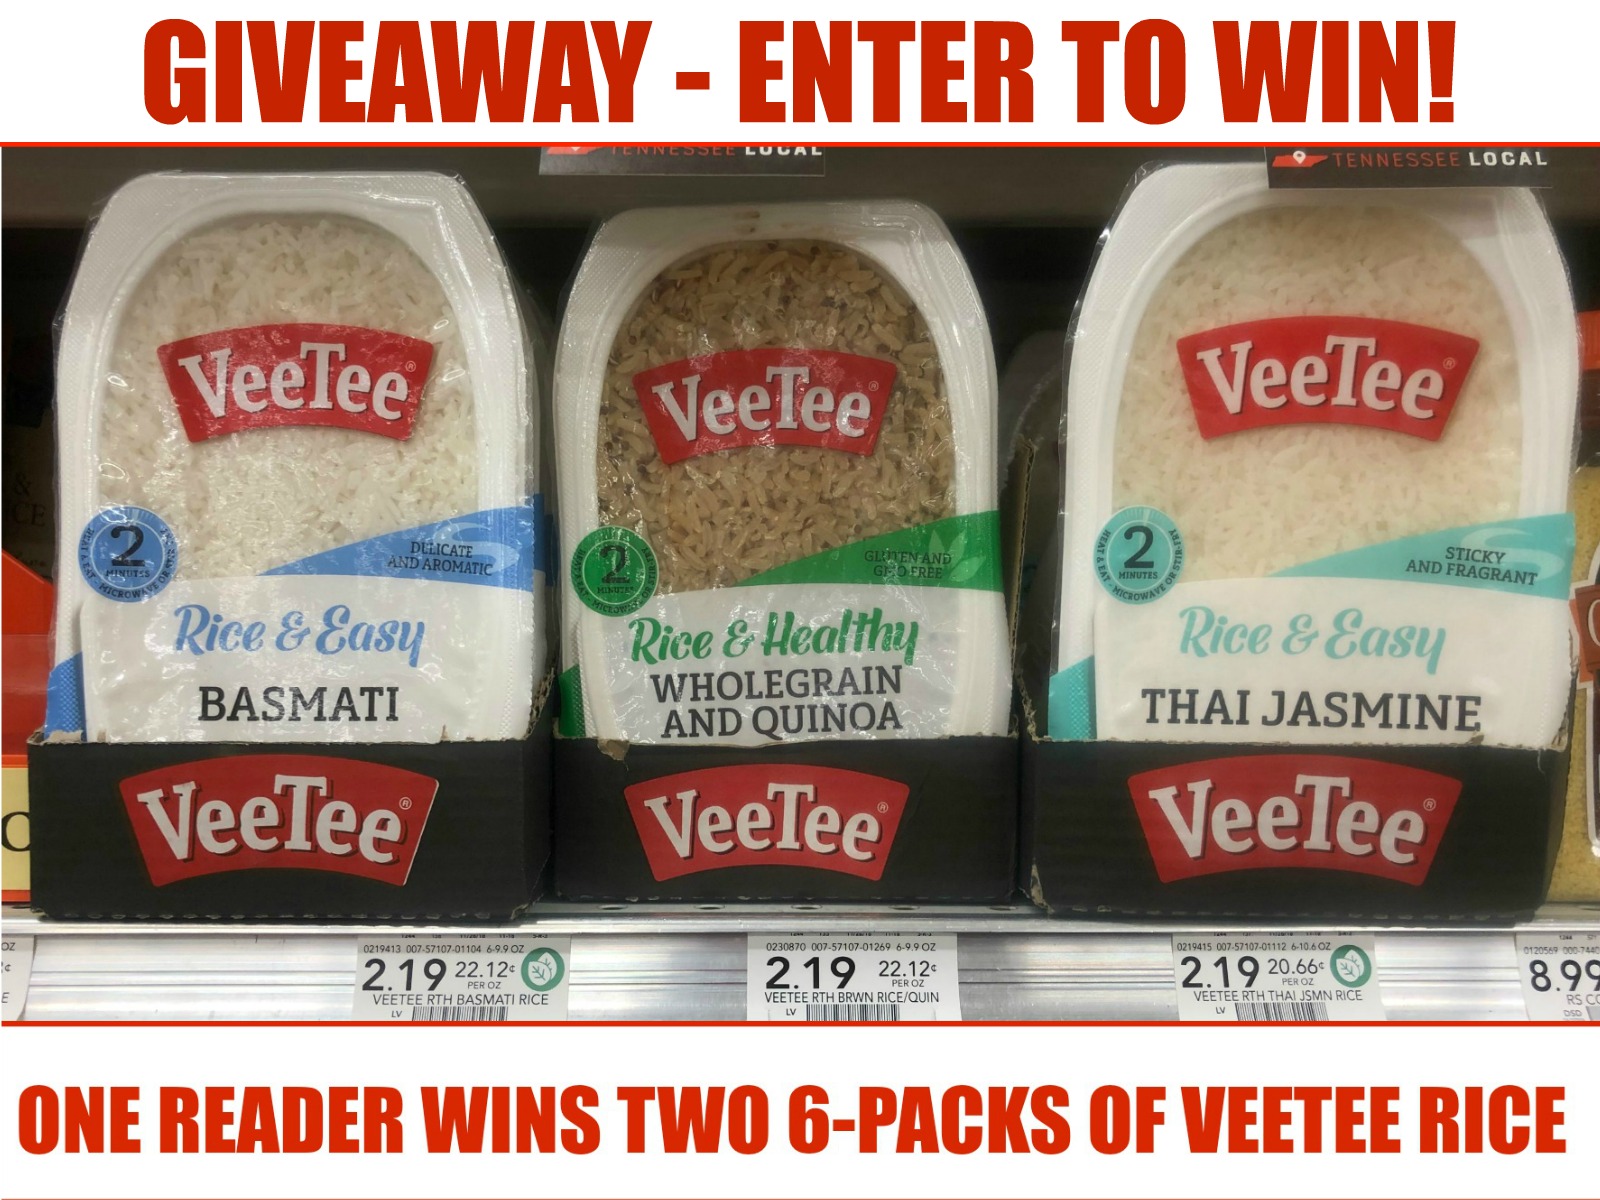 Stock Up On Veetee Rice For Super Easy Meals In A Flash + One Reader Wins Free Veetee Rice